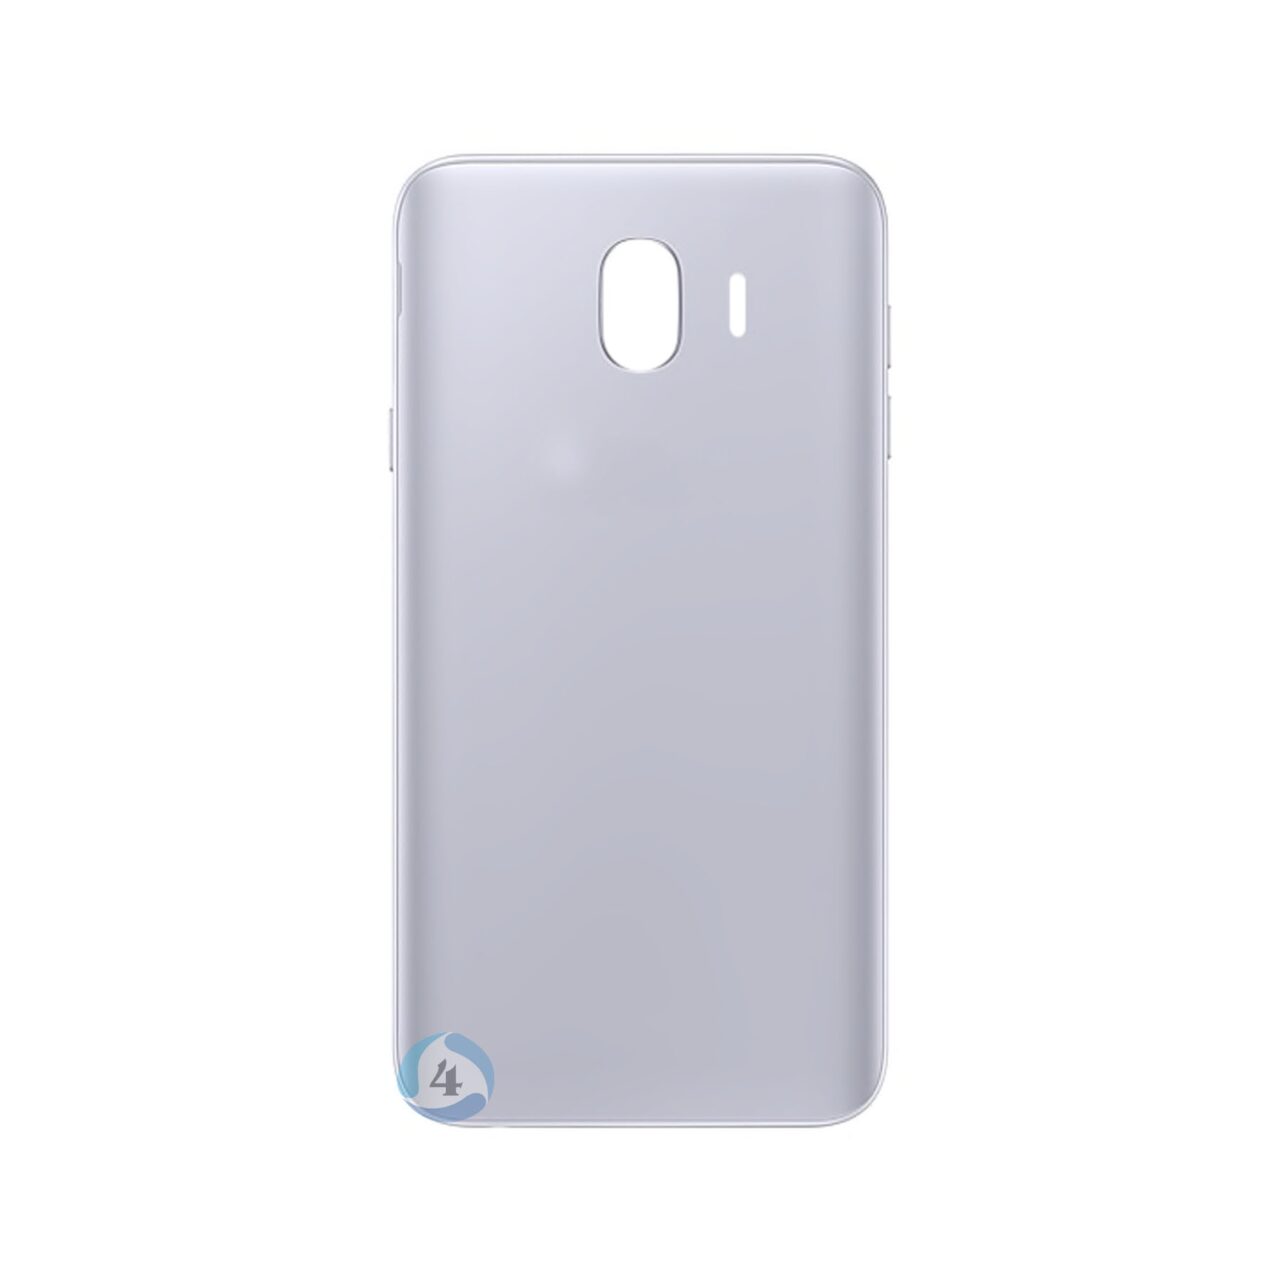 Samsung J400 backcover orchid gray